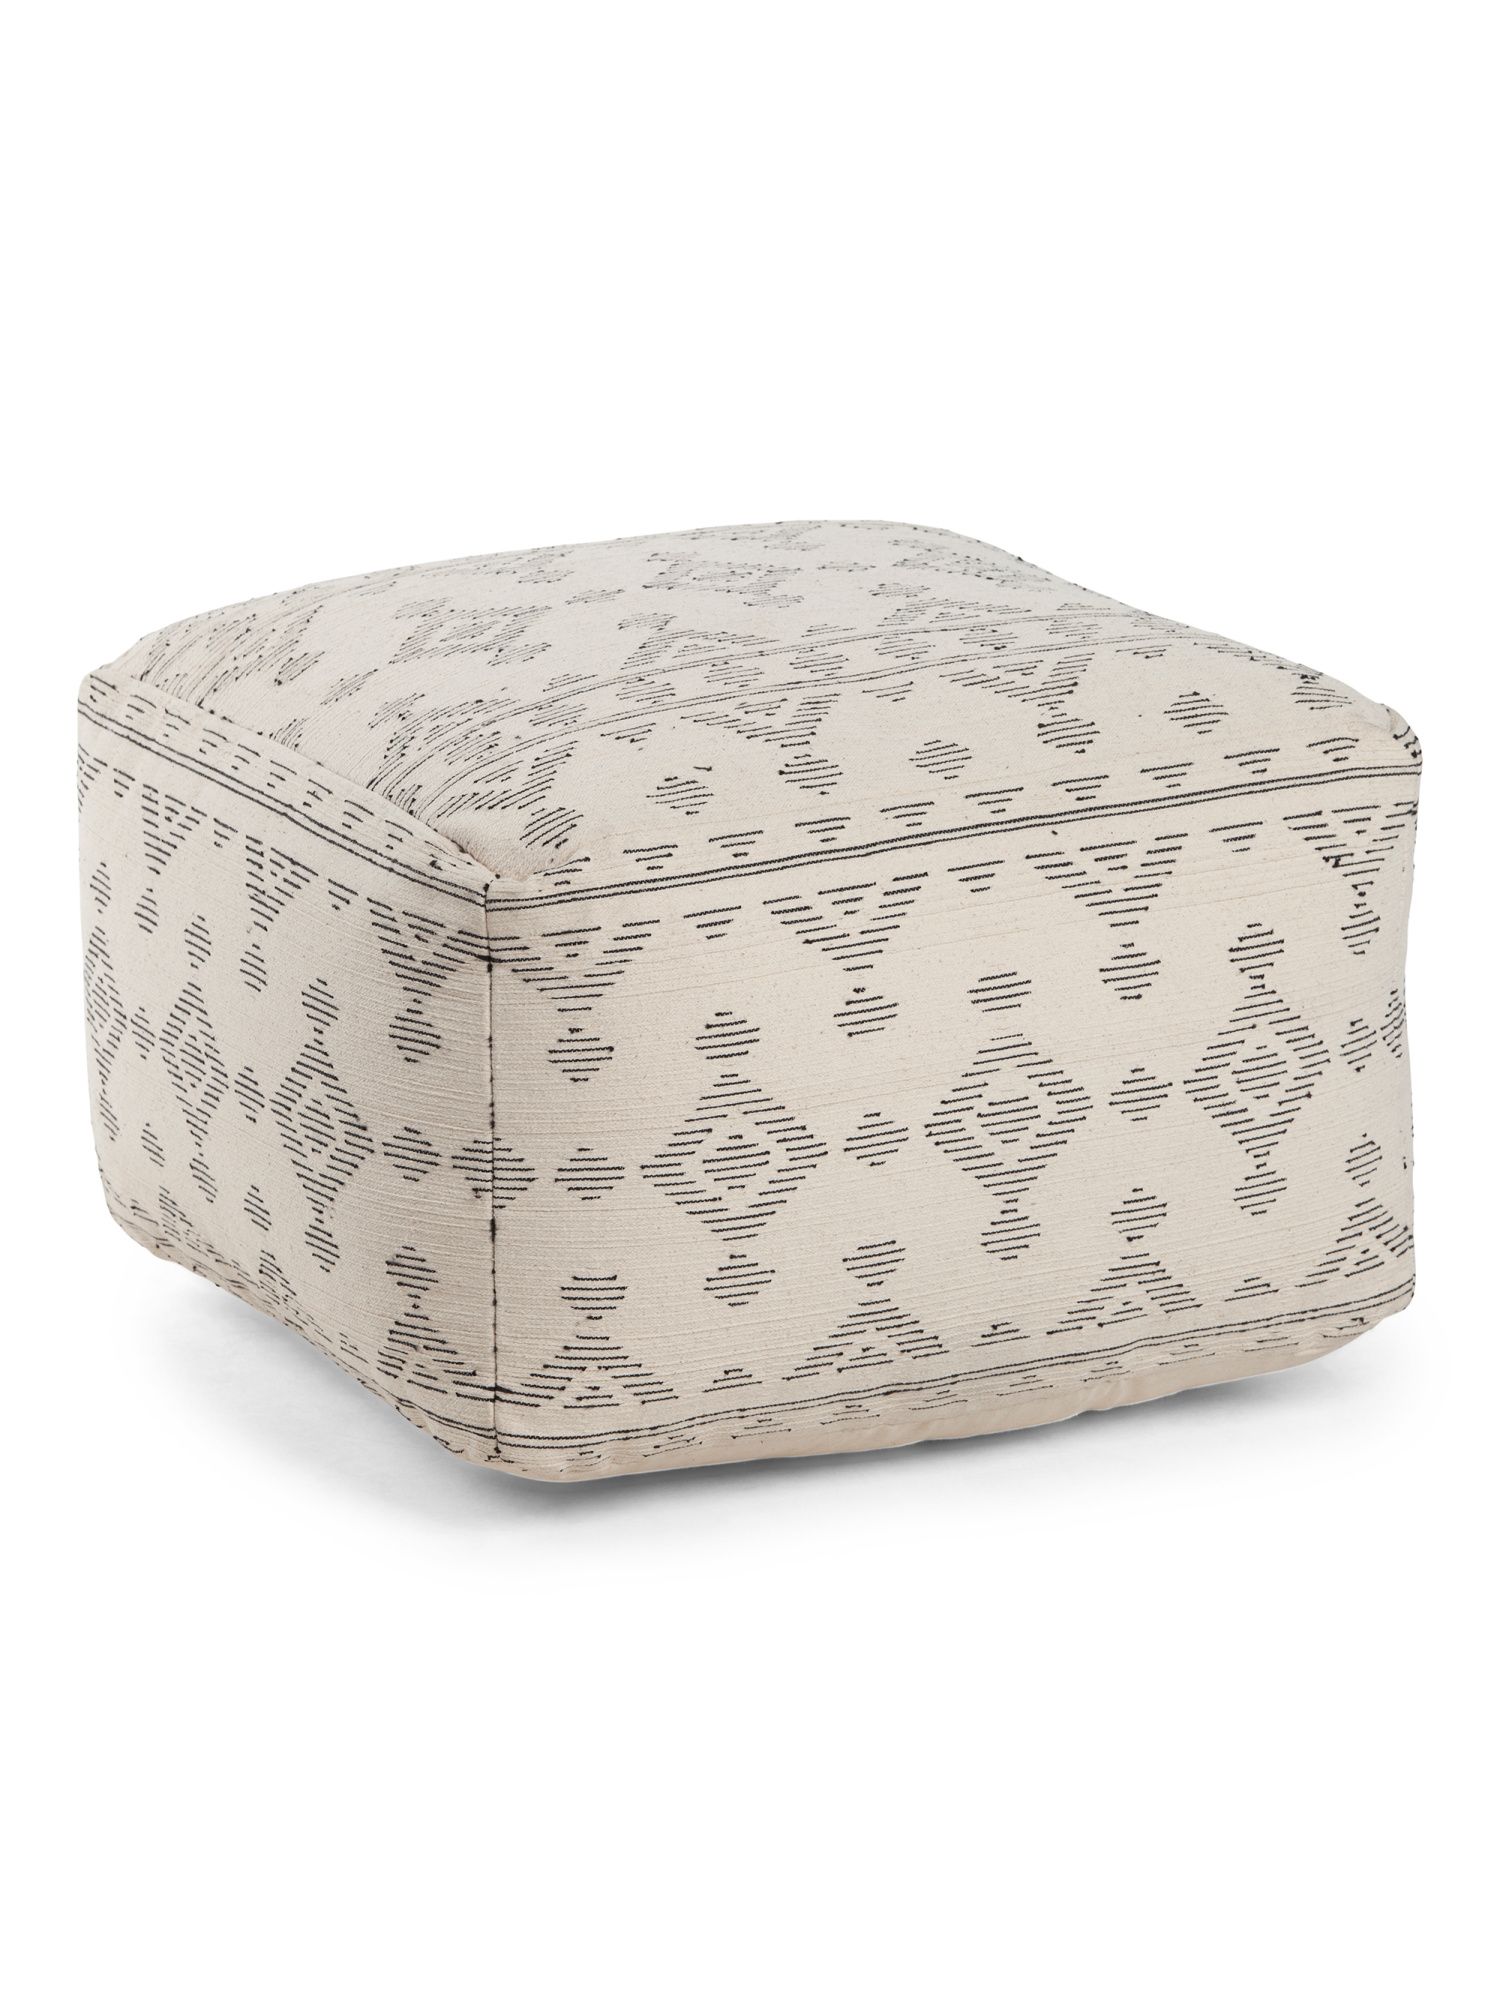 20x13 Made In India Textured Pouf | TJ Maxx